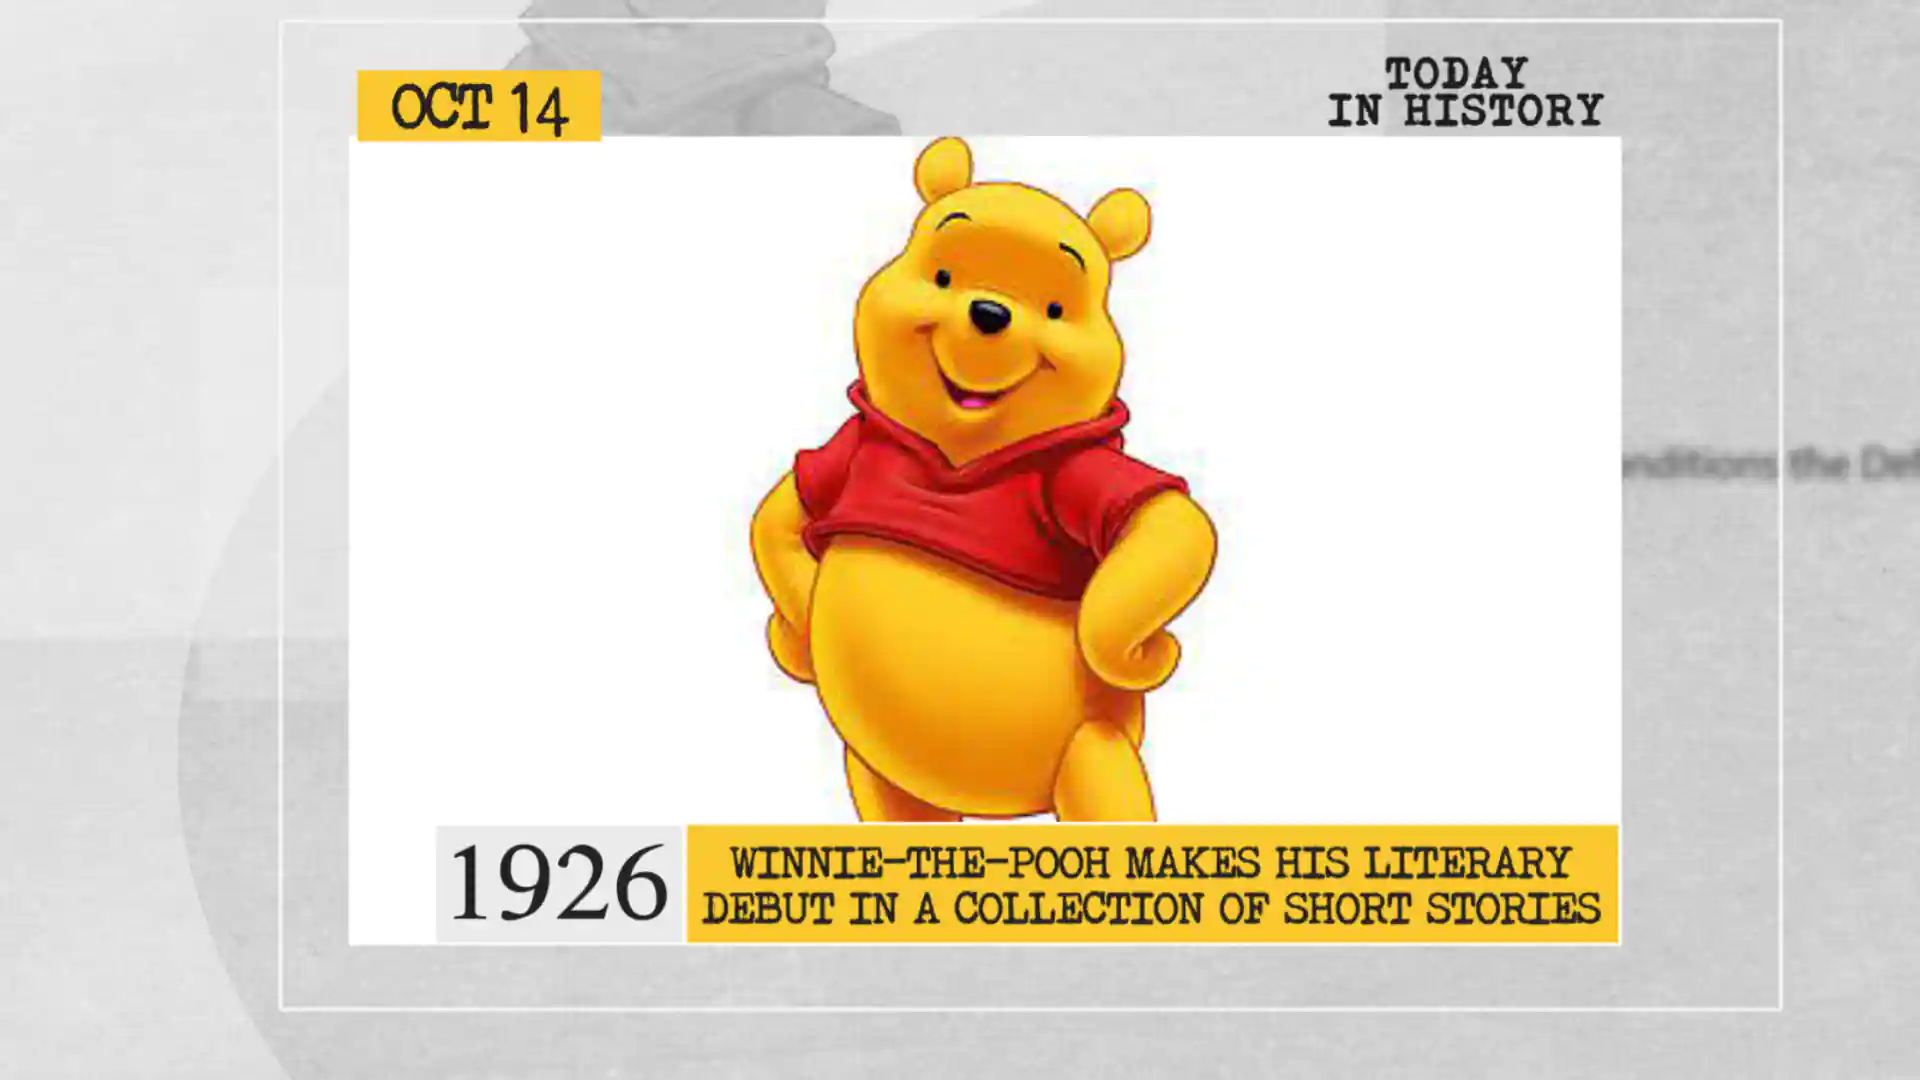 1926 - Winnie-the-Pooh Makes his Literary Debut